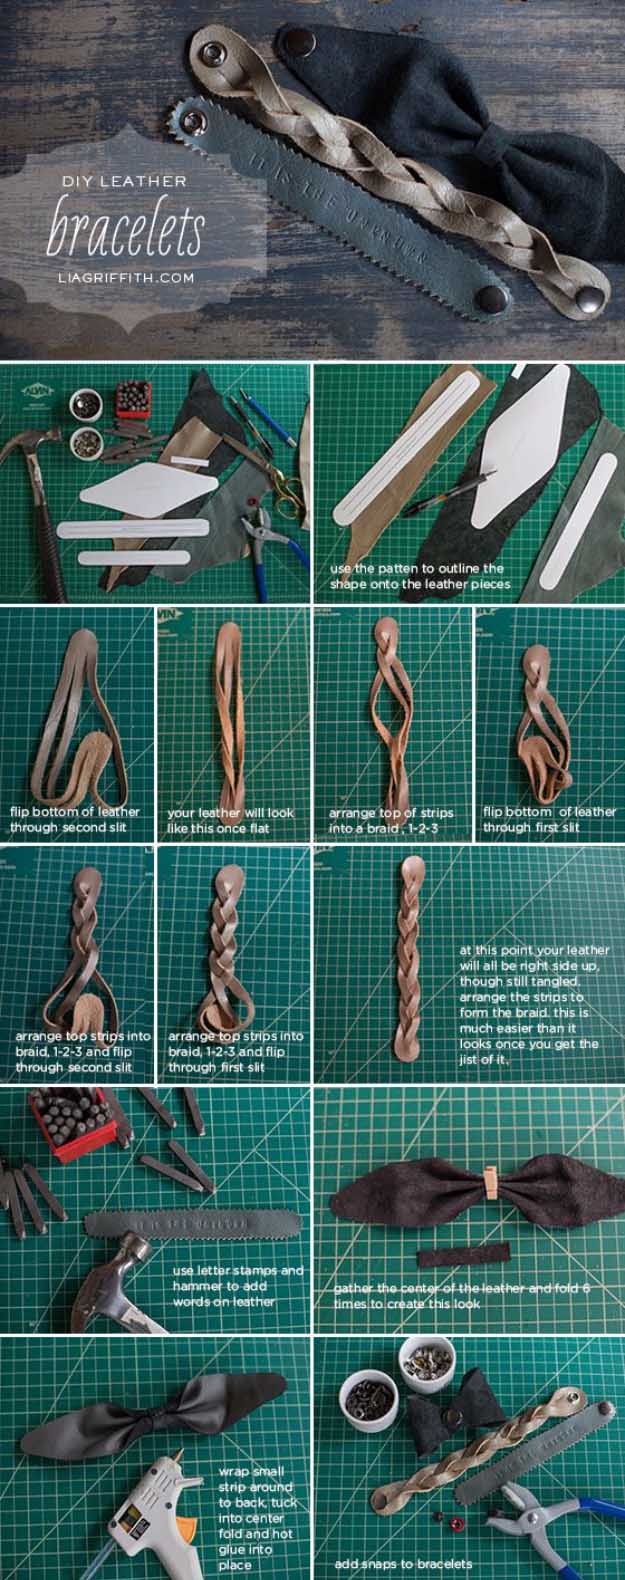 Awesome Crafts for Men and Manly DIY Project Ideas Guys Love - Fun Gifts, Manly Decor, Games and Gear. Tutorials for Creative Projects to Make This Weekend | Three DIY Leather Bracelets #diy #craftsformen #guys #giftsformen